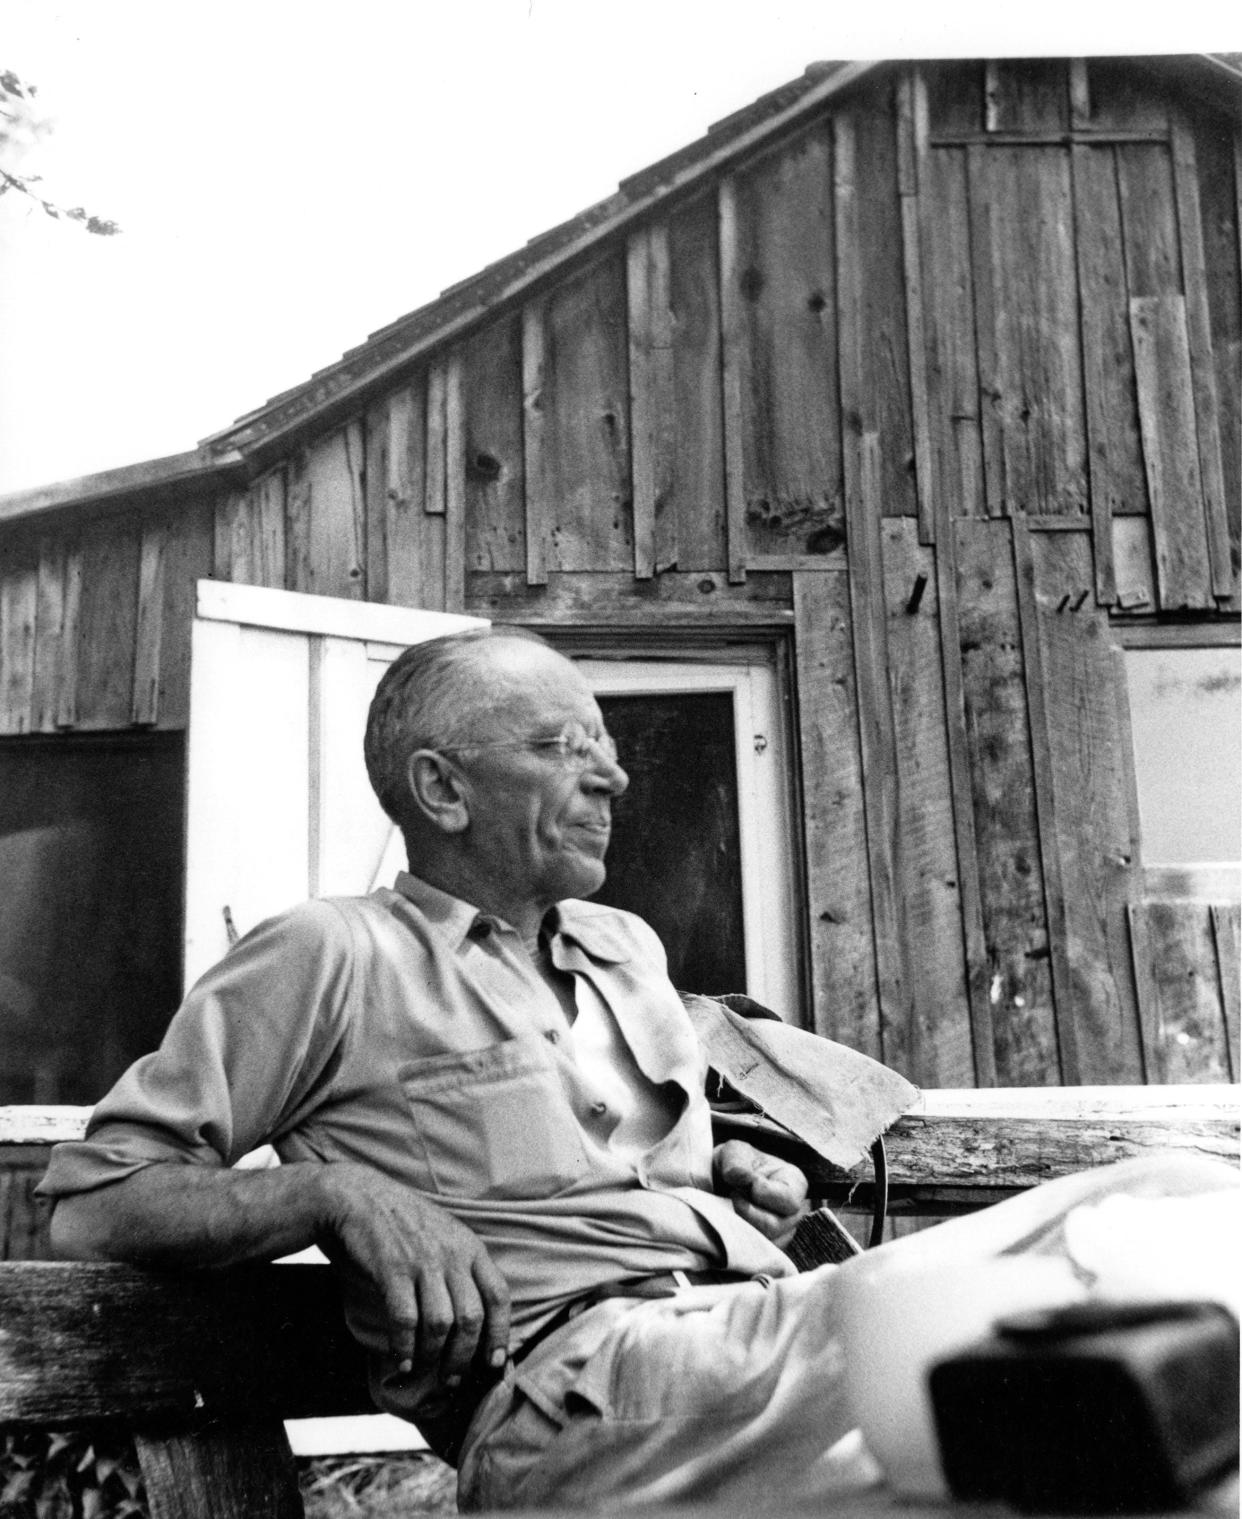 Aldo Leopold, author of "A Sand County Almanac," is photographed outside "The Shack," his family's cabin on their farm in Sauk County.